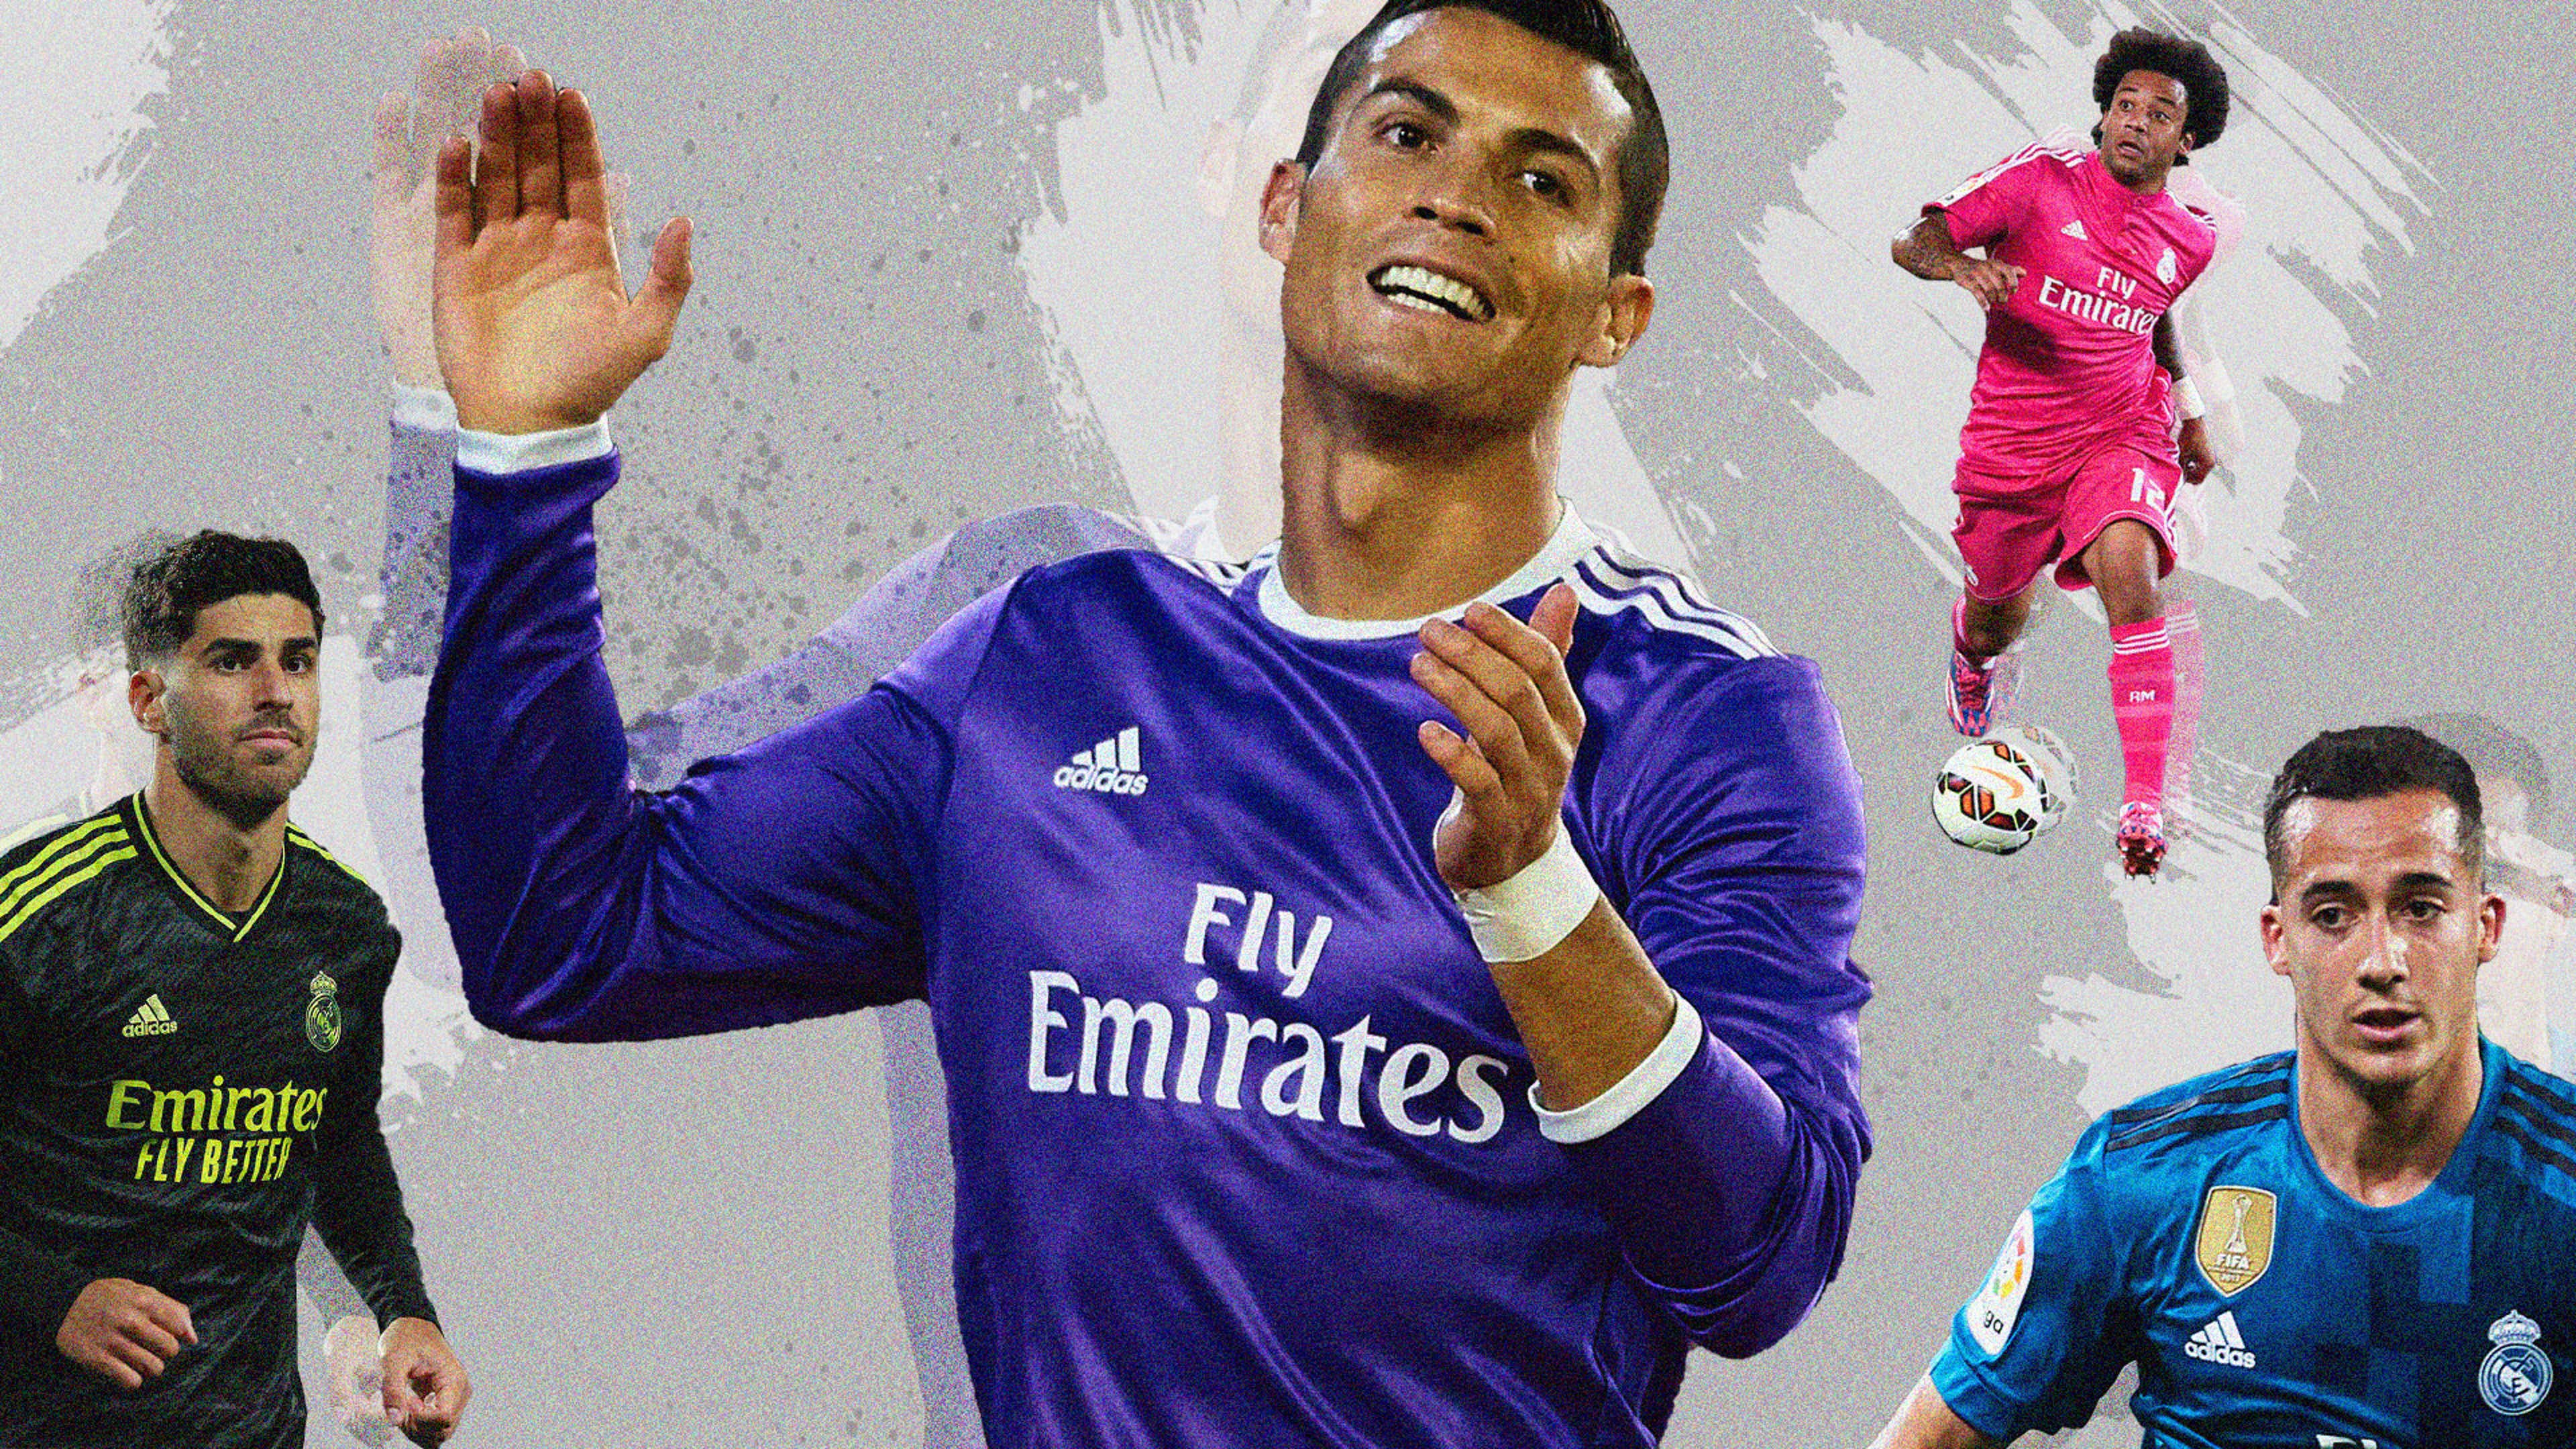 Real Madrid's top 10 away and third kits of all time - ranked | Goal.com